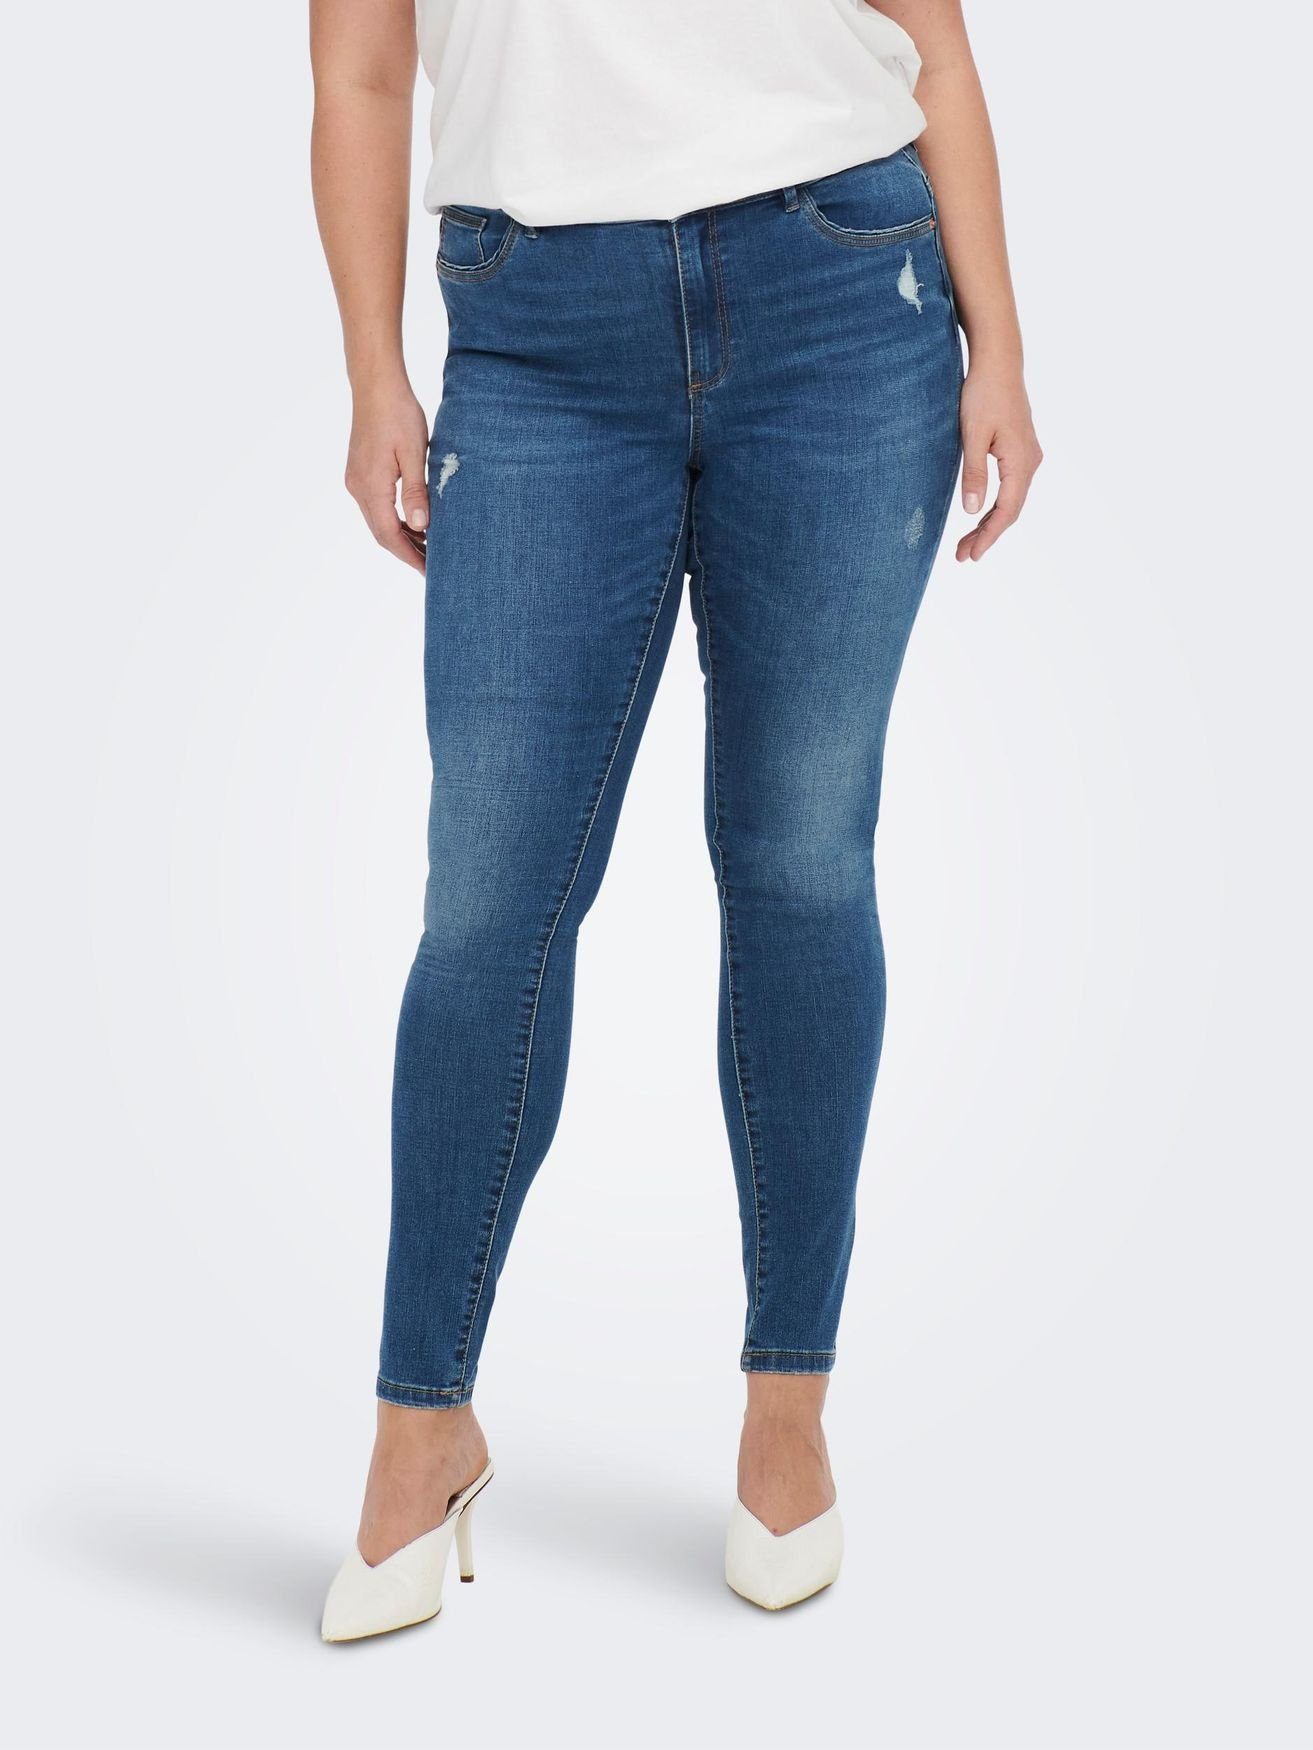 15263094 CARSALLY SKINNY CARMAKOMA 5289 in Blau Skinny-fit-Jeans BJ114-3 - ONLY MID NOOS